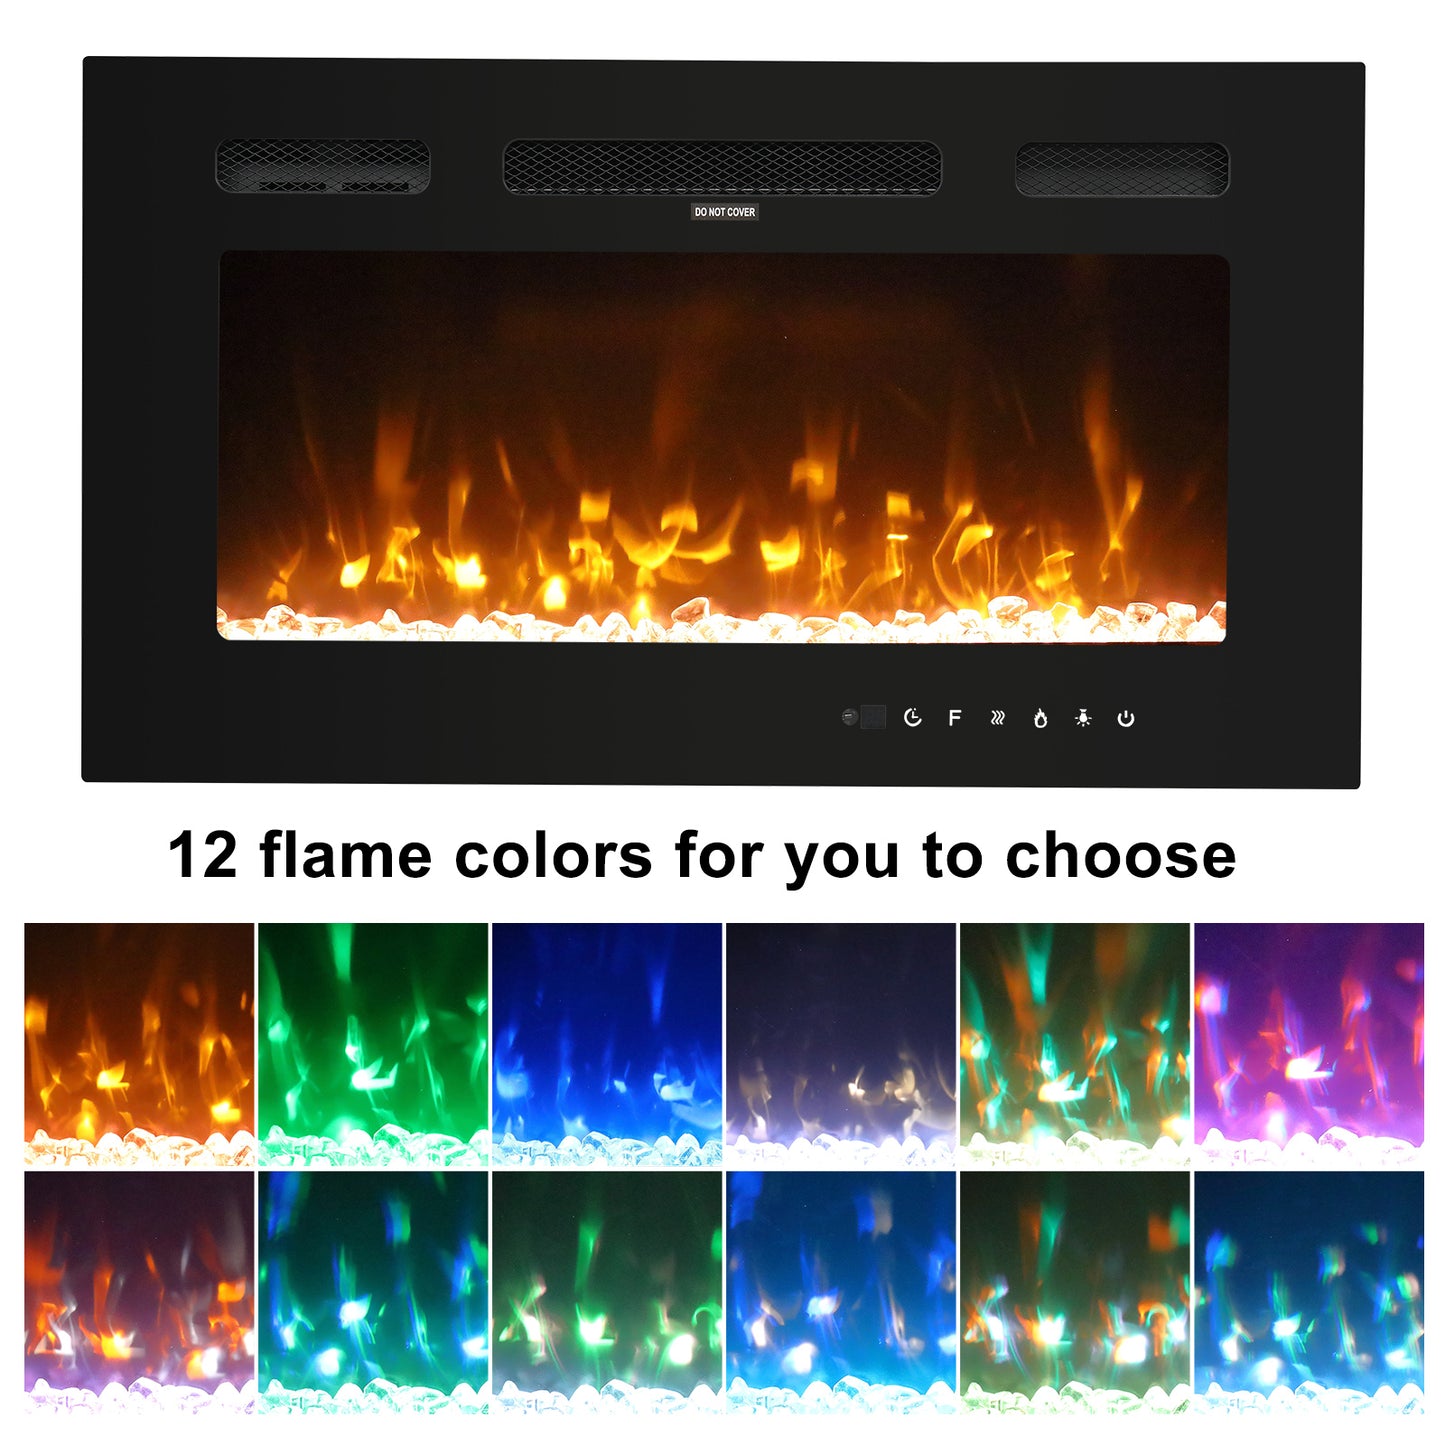 Wall Mounted Fireplace, 30 inch Electric Wall Fireplace, 10 Color Flame Settings, 750-1500 Watt Heater, Electric Fireplace w/ Console & Remote Control with Timer, Adjustable Flame Level, Black, C19